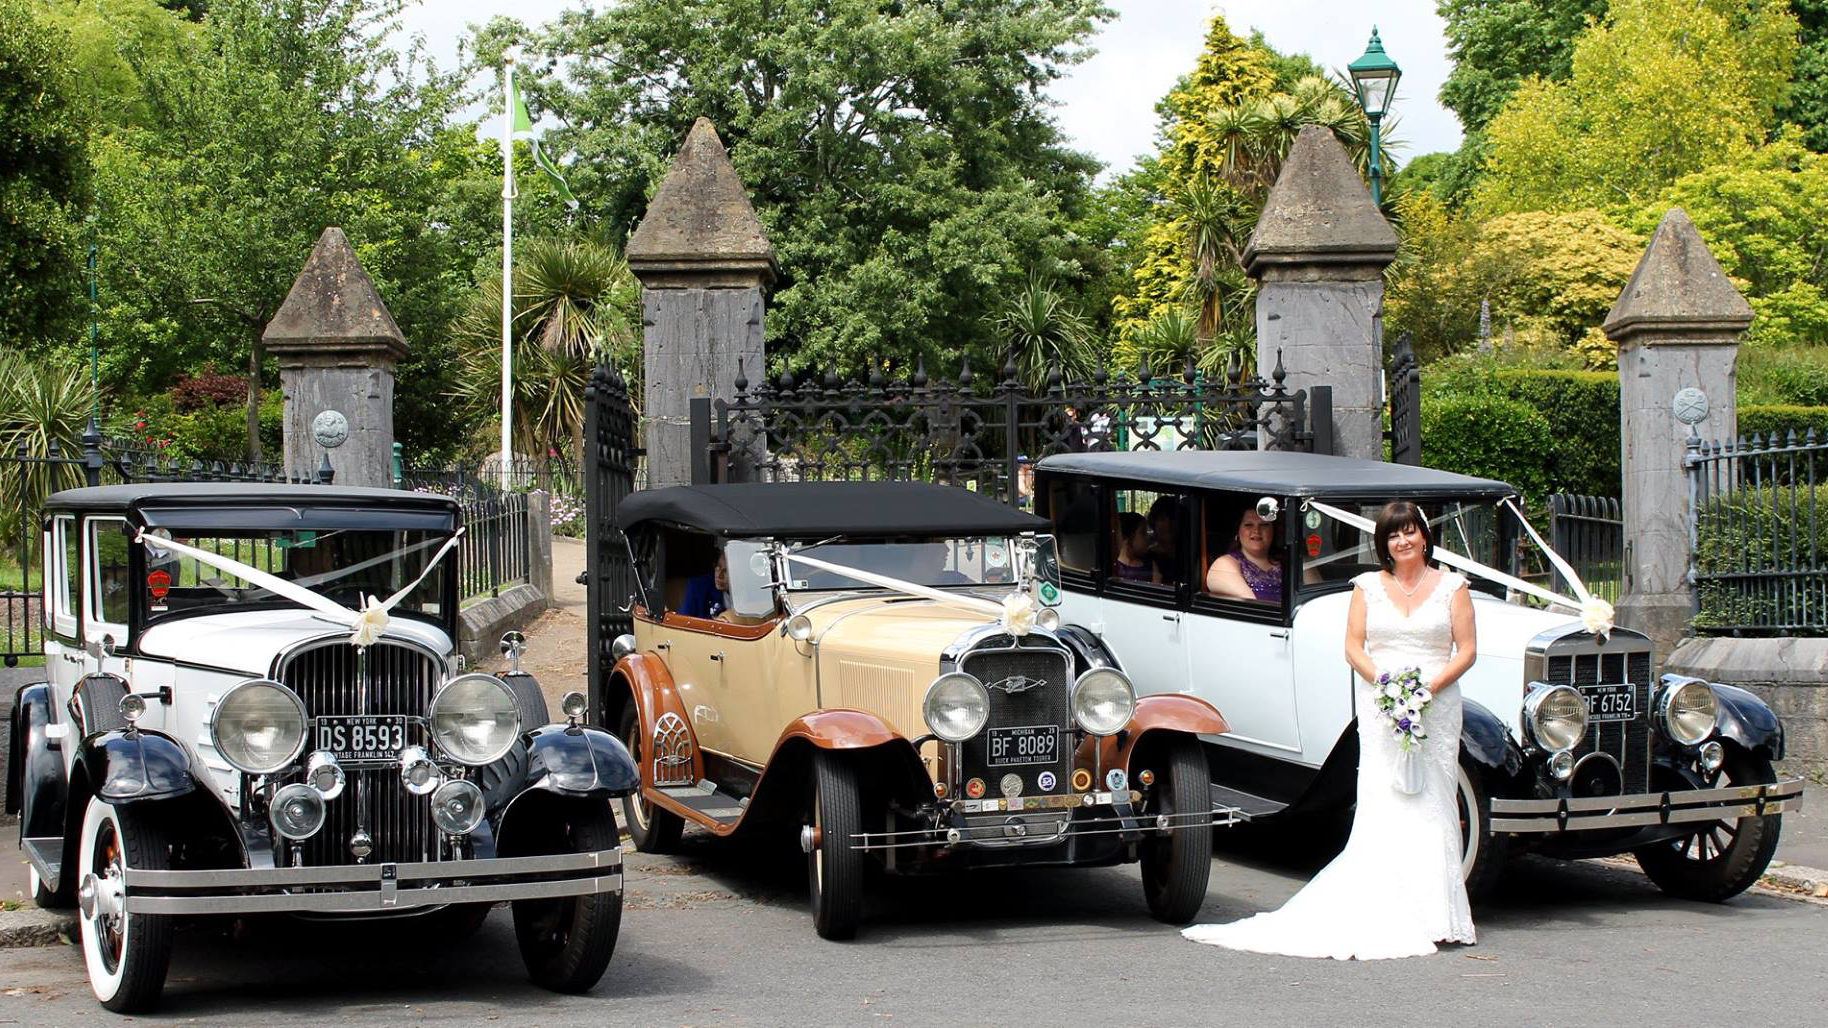 Three vintage wedding cars decorated with white ribbons at a local Newquay wedding. All three vehicles are parked side-by-side with bride wearing a white dress holding a bridal bou